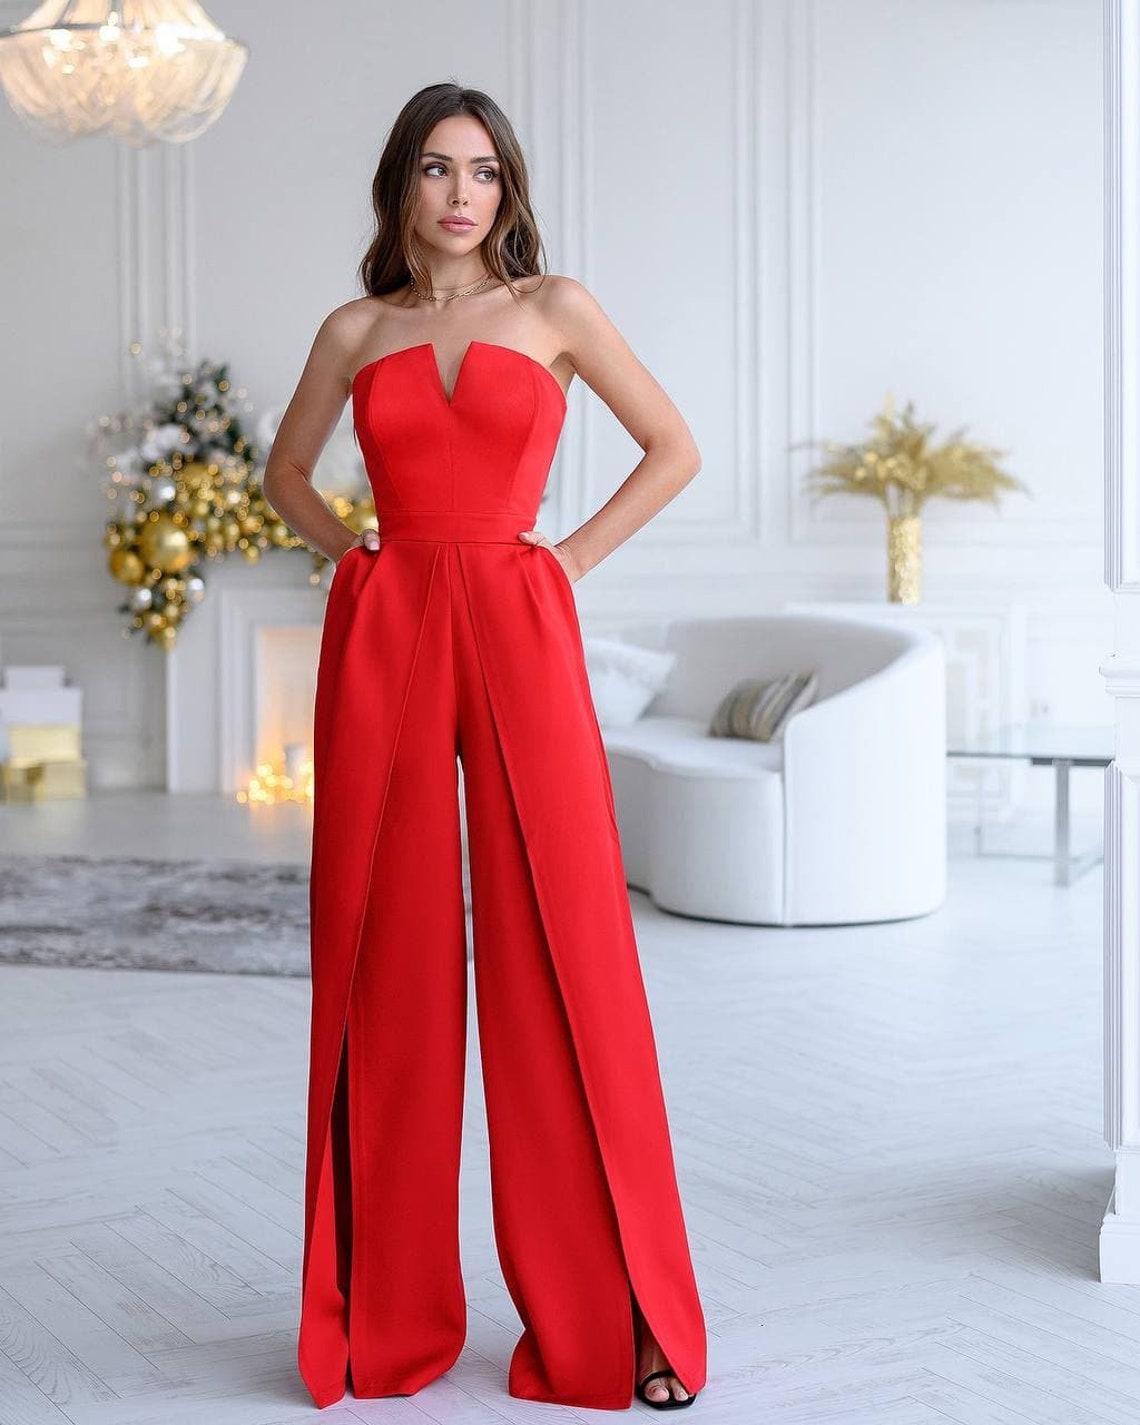 Red Jumpsuit Women Formal Prom Jumpsuit Holiday Party Outfit - Etsy